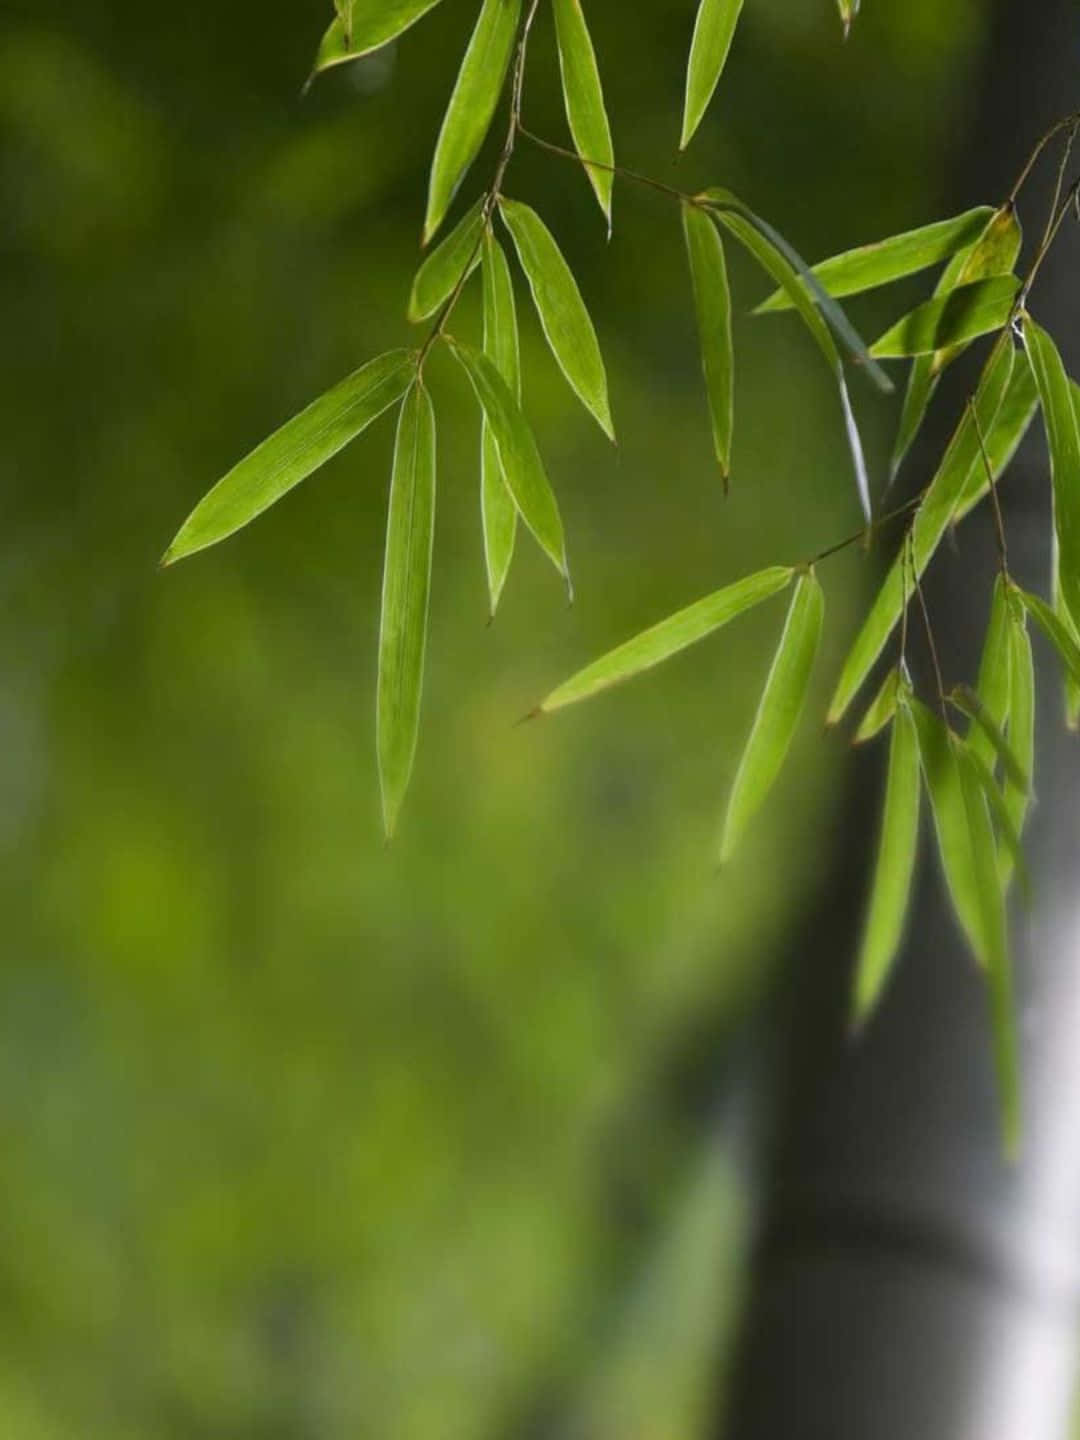 1440p Bamboo Background Leaves With Blurry Backdrop